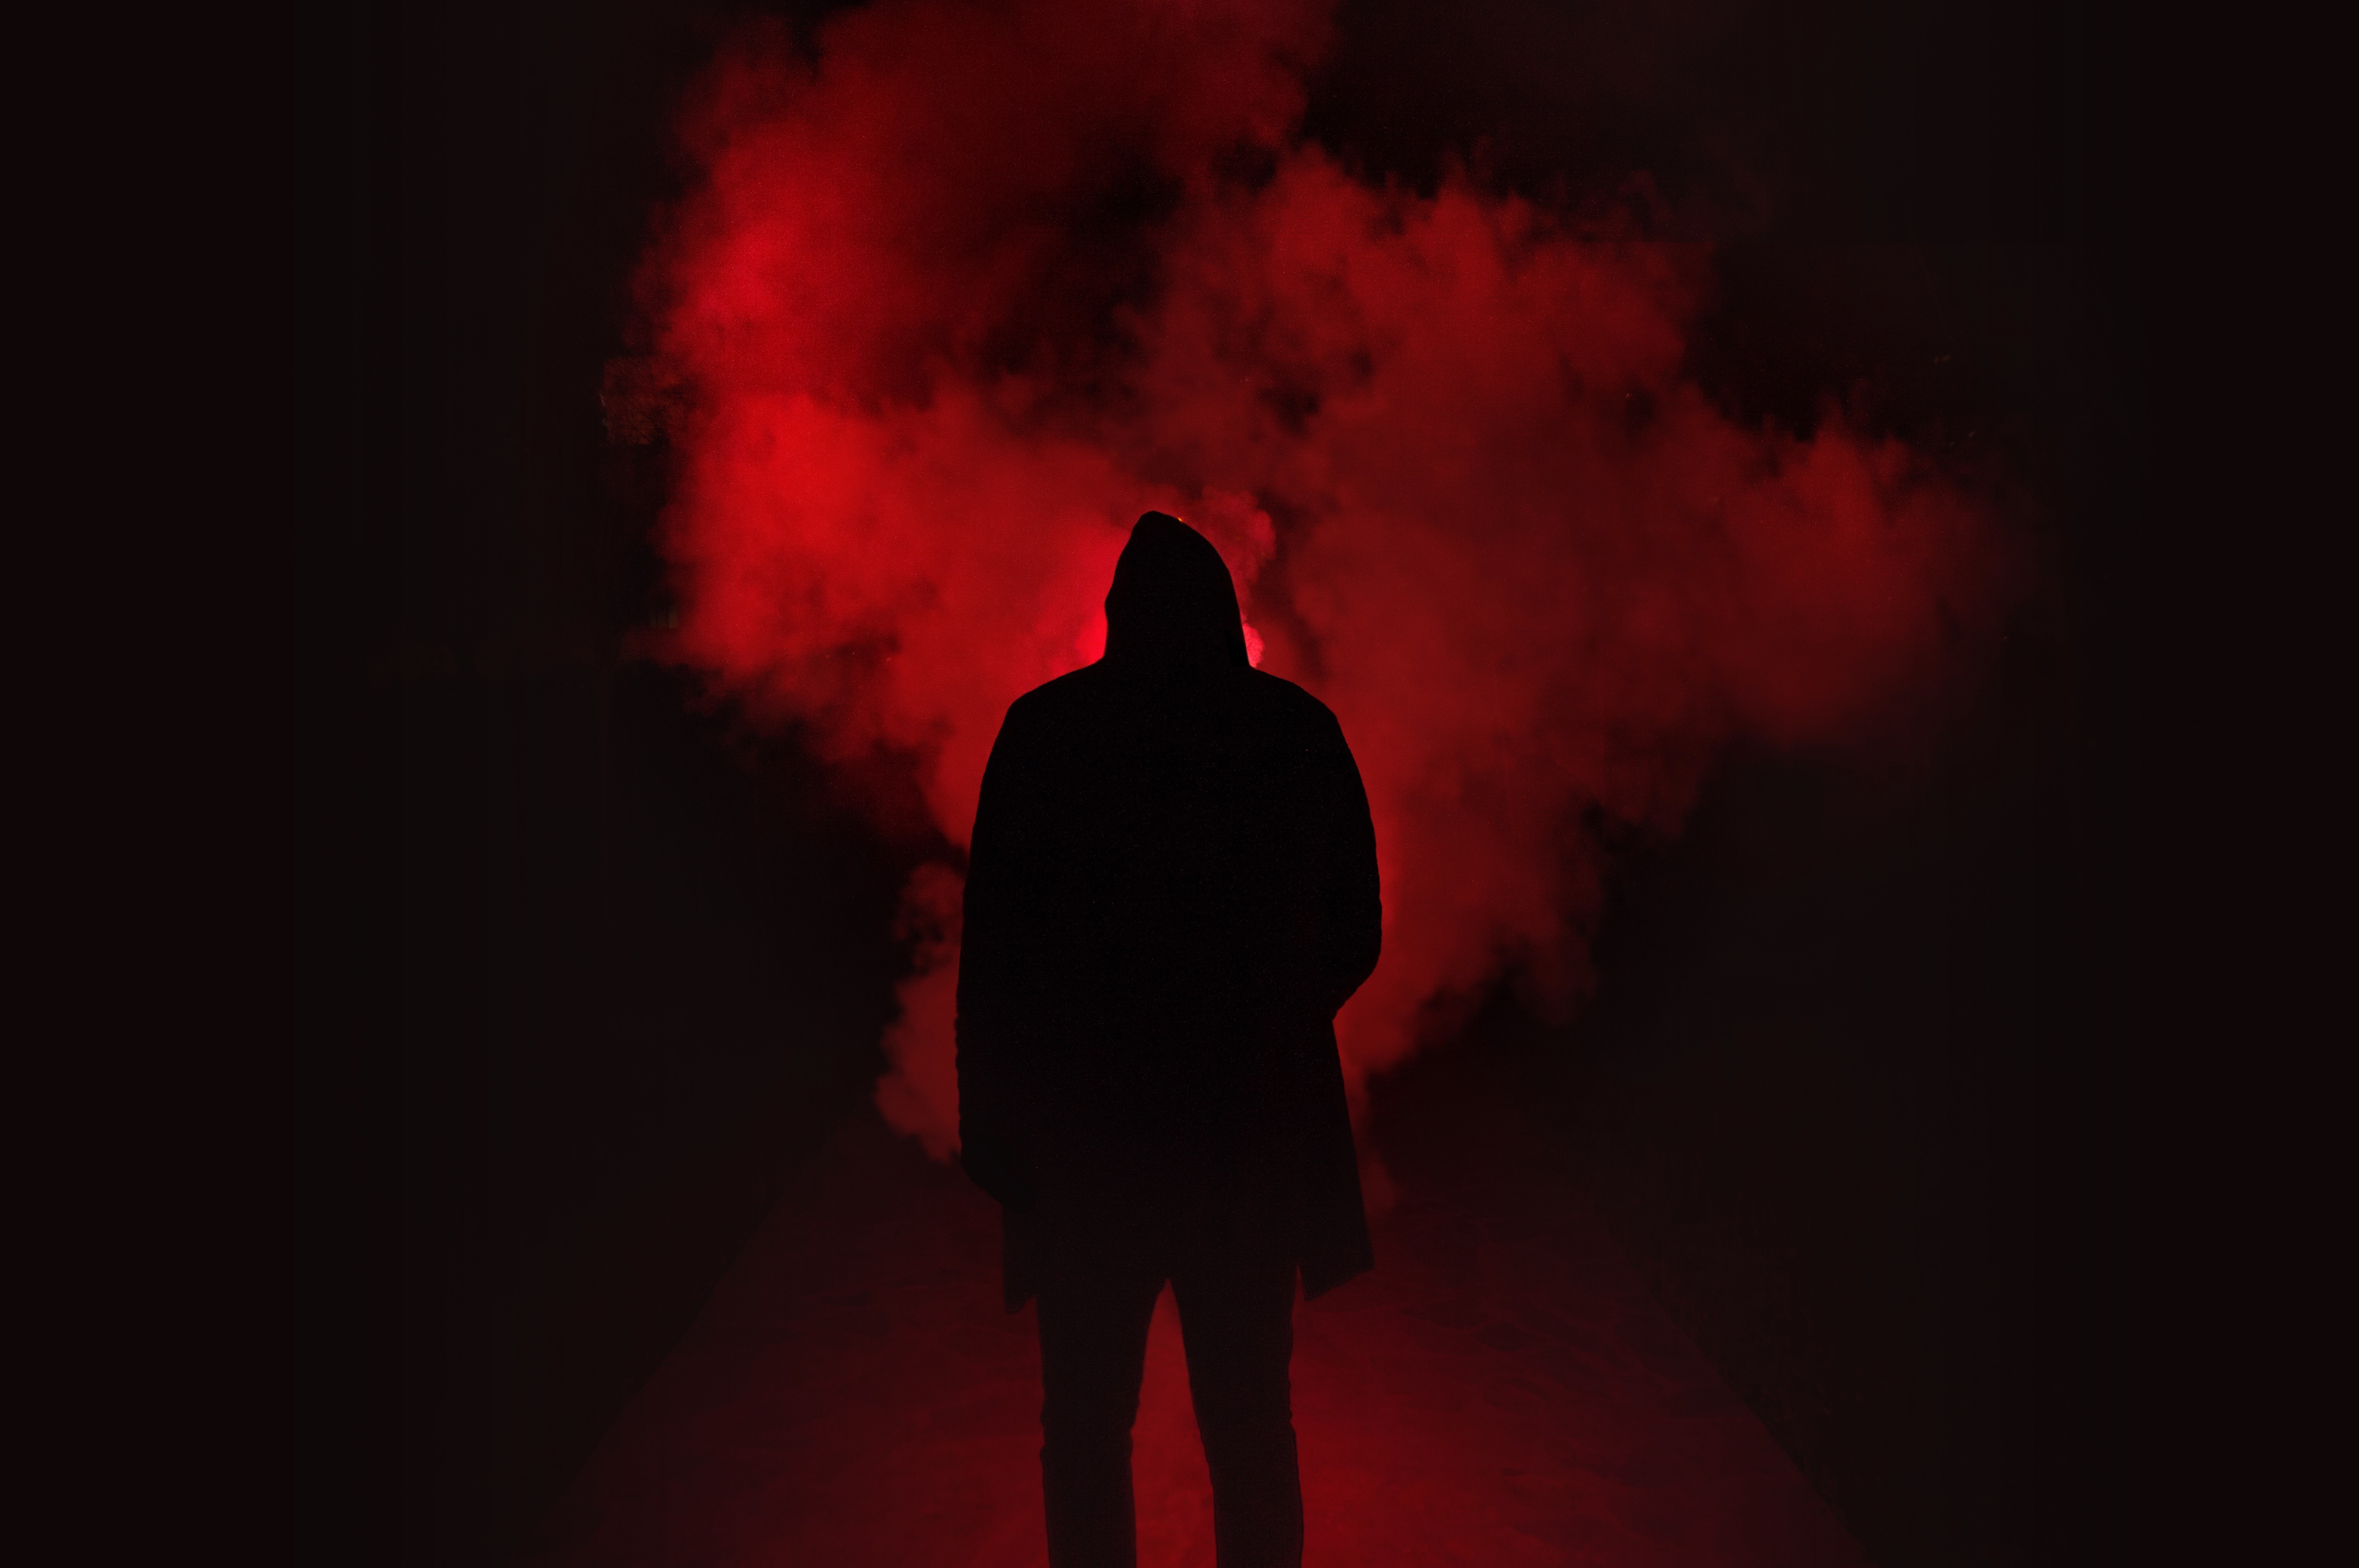 People 6016x4000 smoke silhouette photography dark red light minimalism simple background red